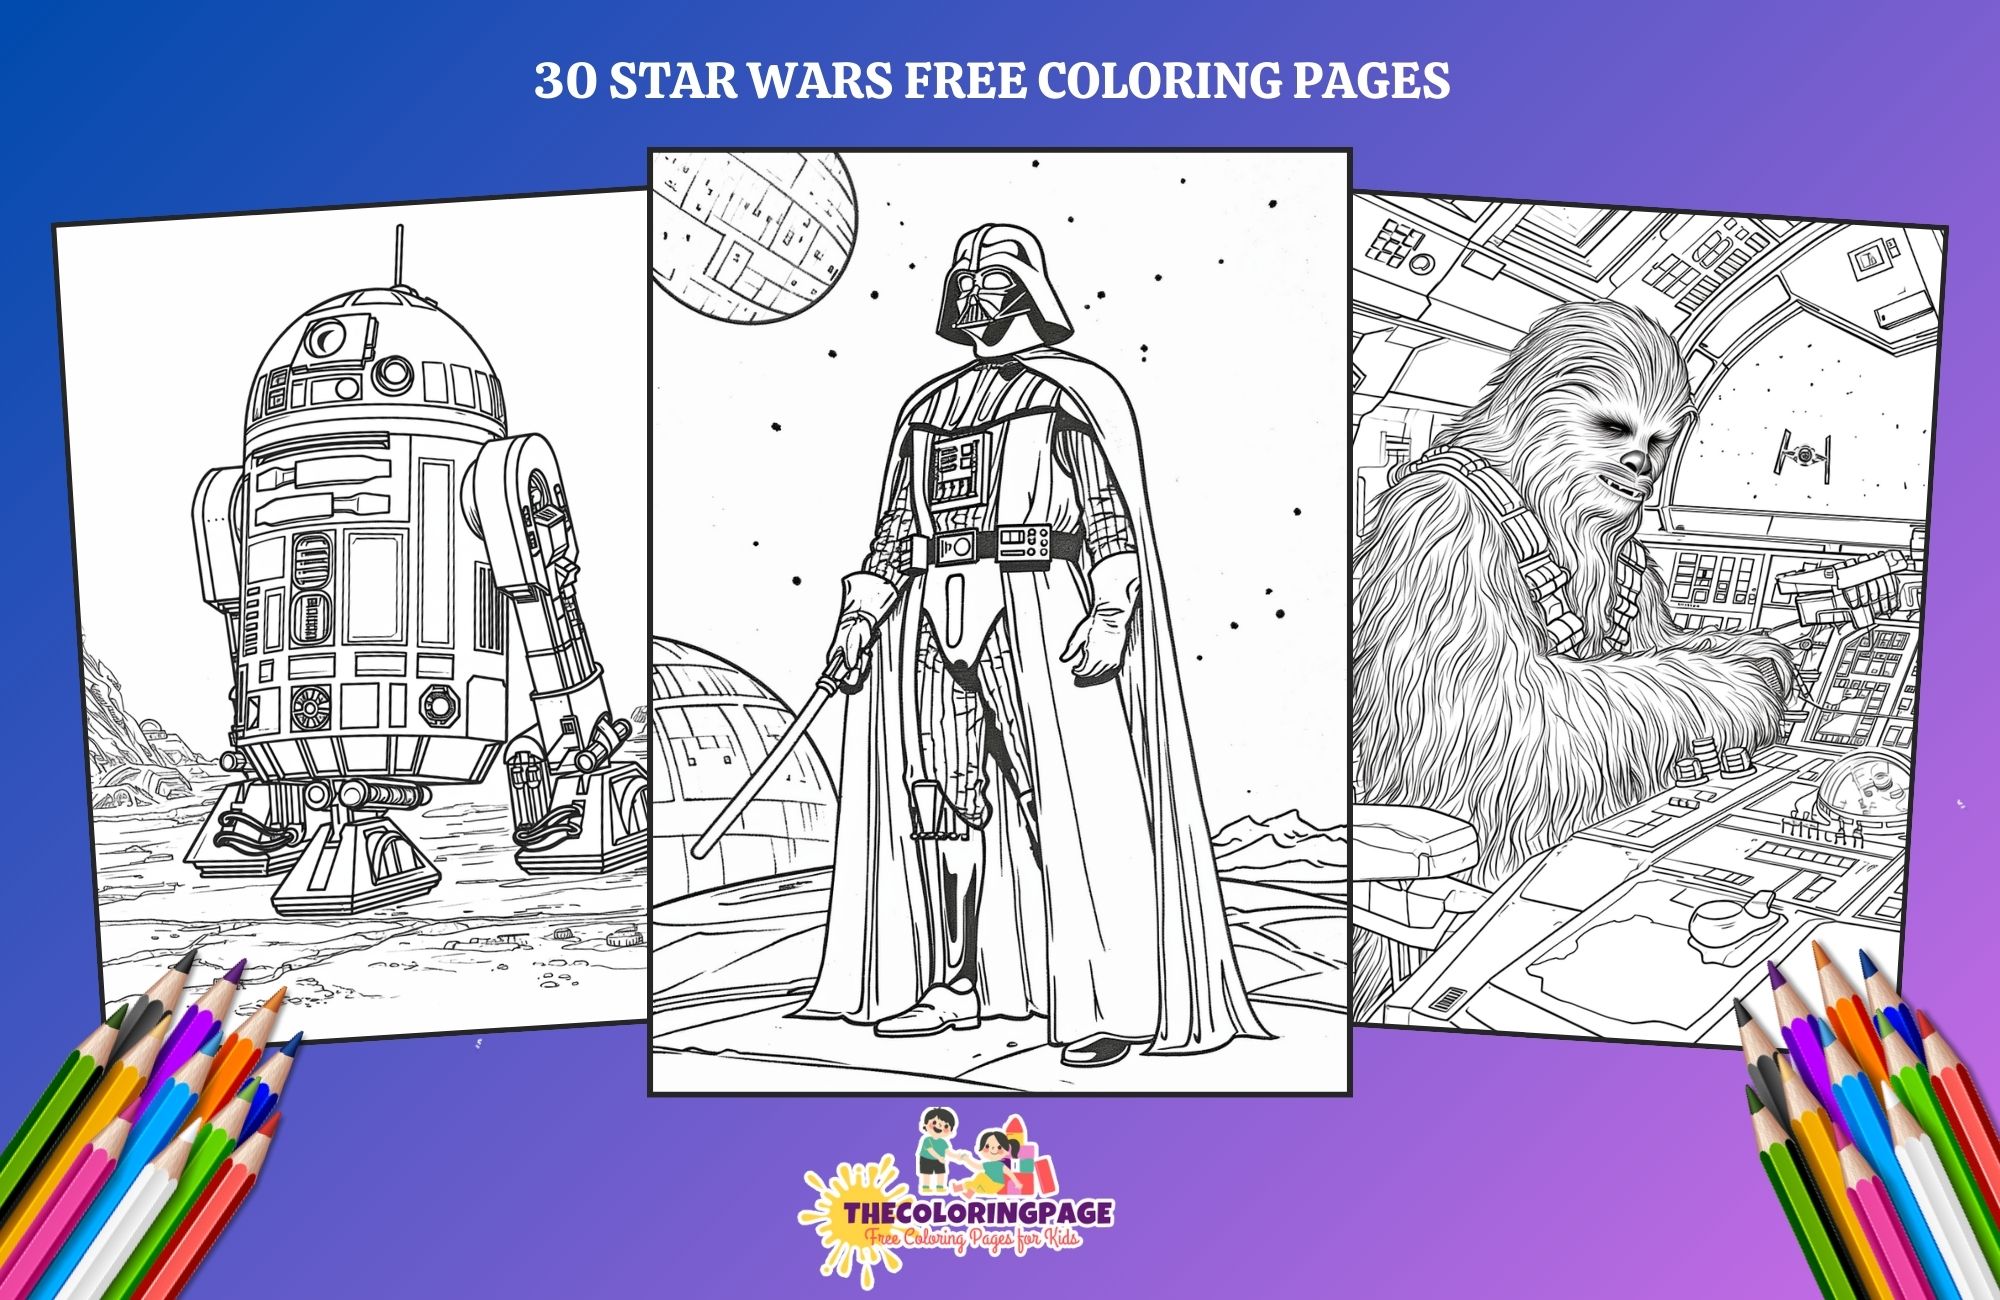 among us coloring page free